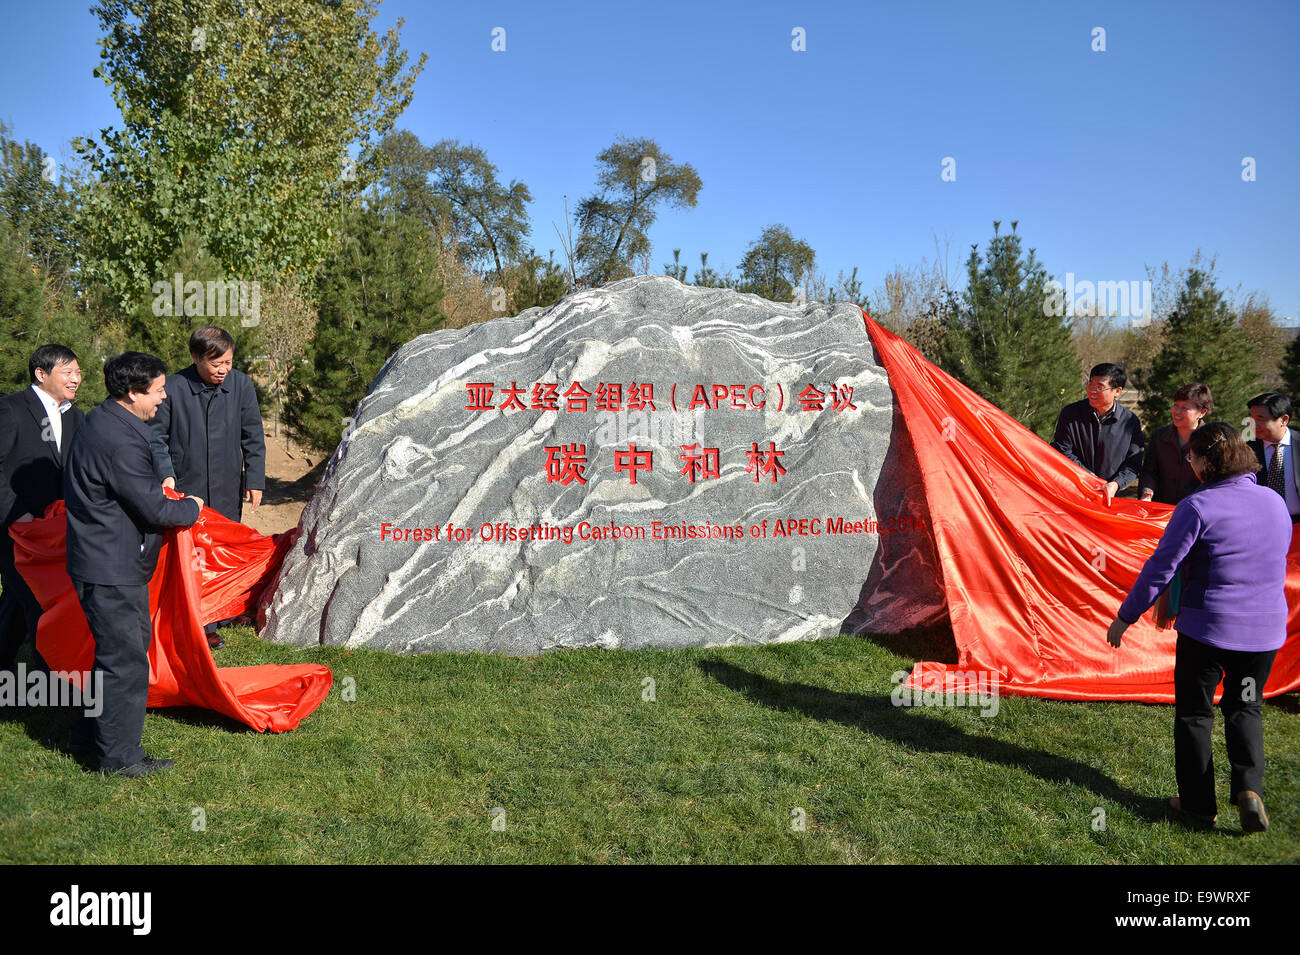 Beijing, China. 3rd Nov, 2014. A stone tablet is unveiled during the launching ceremony of establishing forest for offsetting carbon emission of APEC meeting in Beijing, China, Nov. 3, 2014. The forest will cover an area of 1,274 mu (85 hectares), according to the event organizer. © Li Xin/Xinhua/Alamy Live News Stock Photo